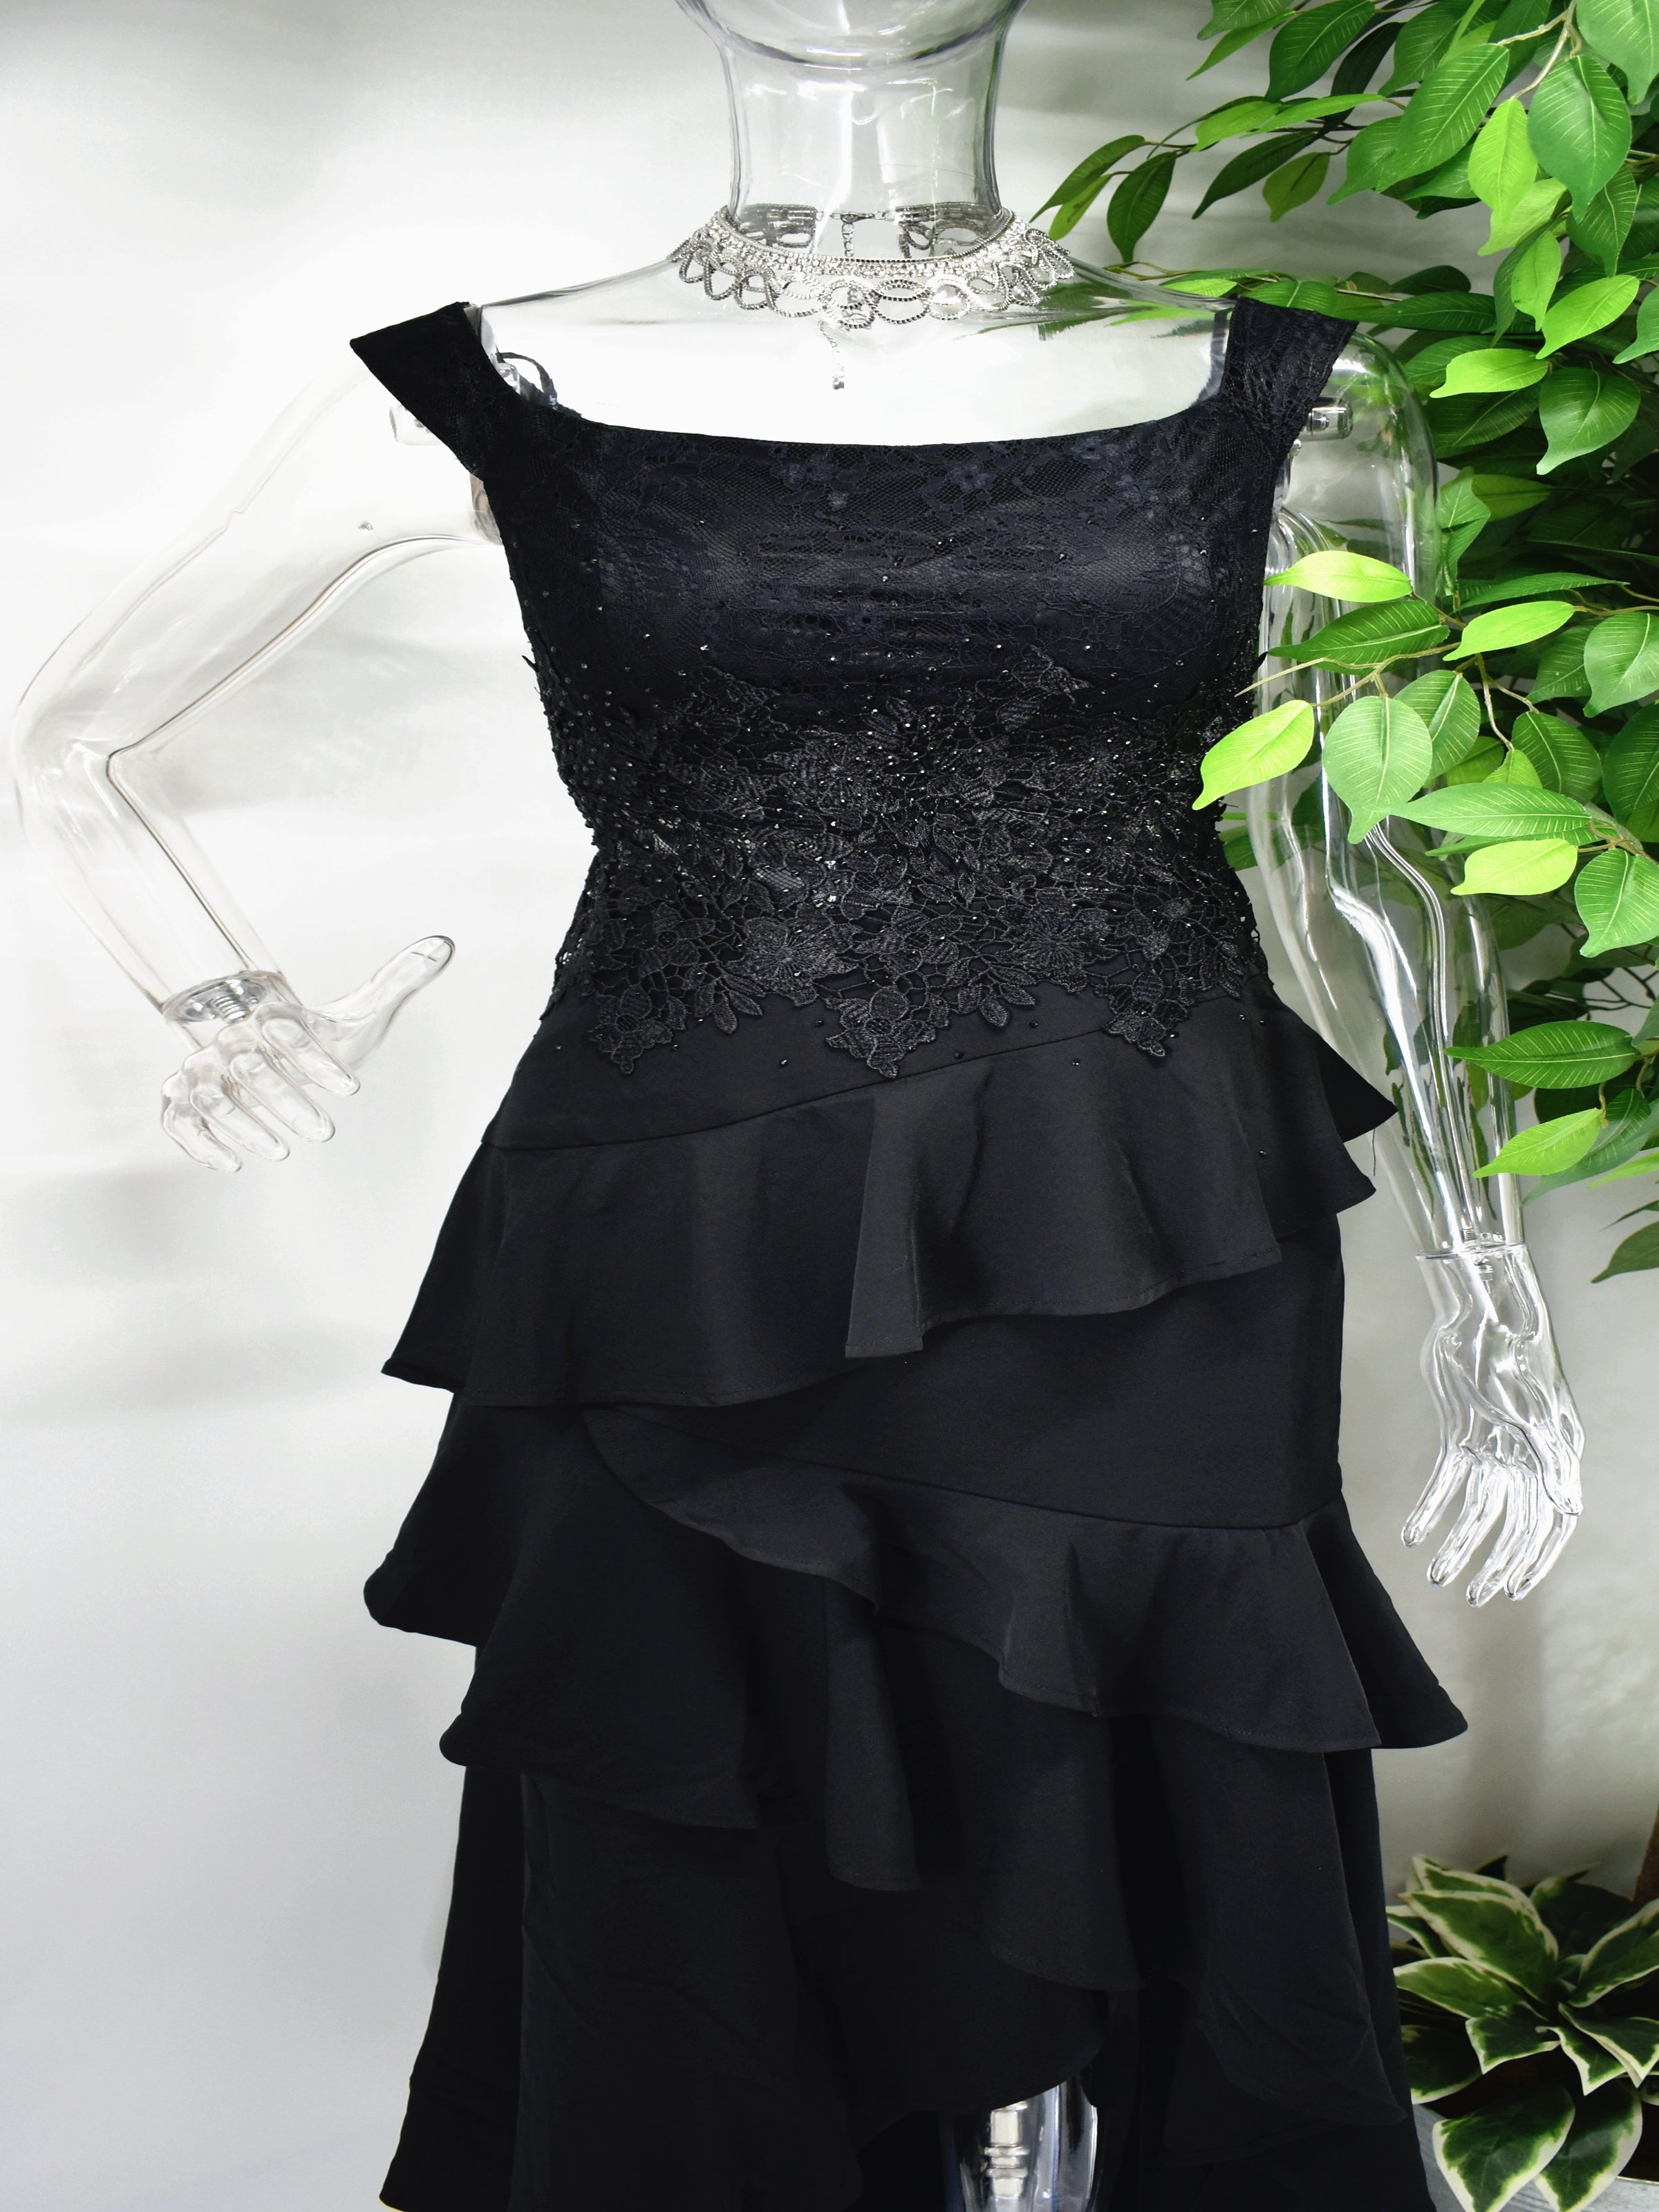 There is so much to love about our incredible Bedelia Black dress. The black formal dress has a boat neckline accompanied by a beaded bodice and frills cascading down to the hem of the dress.  